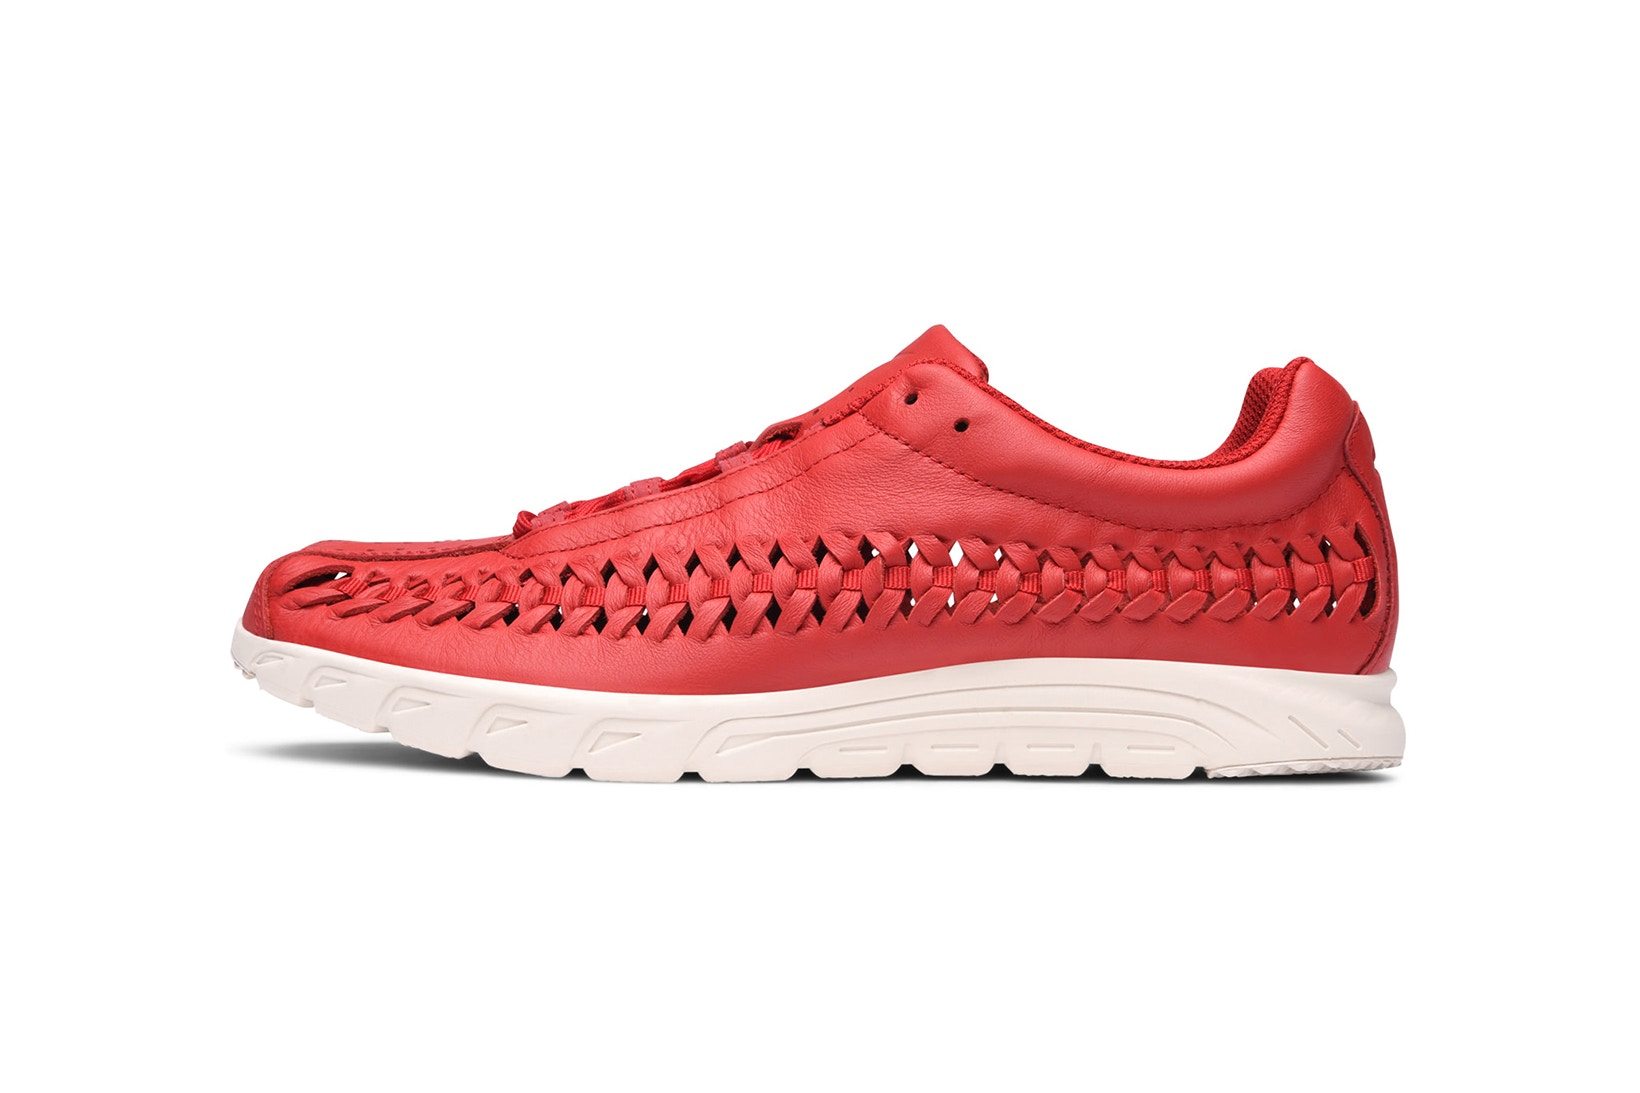 Nike Mayfly Woven "Independence Day" Pack